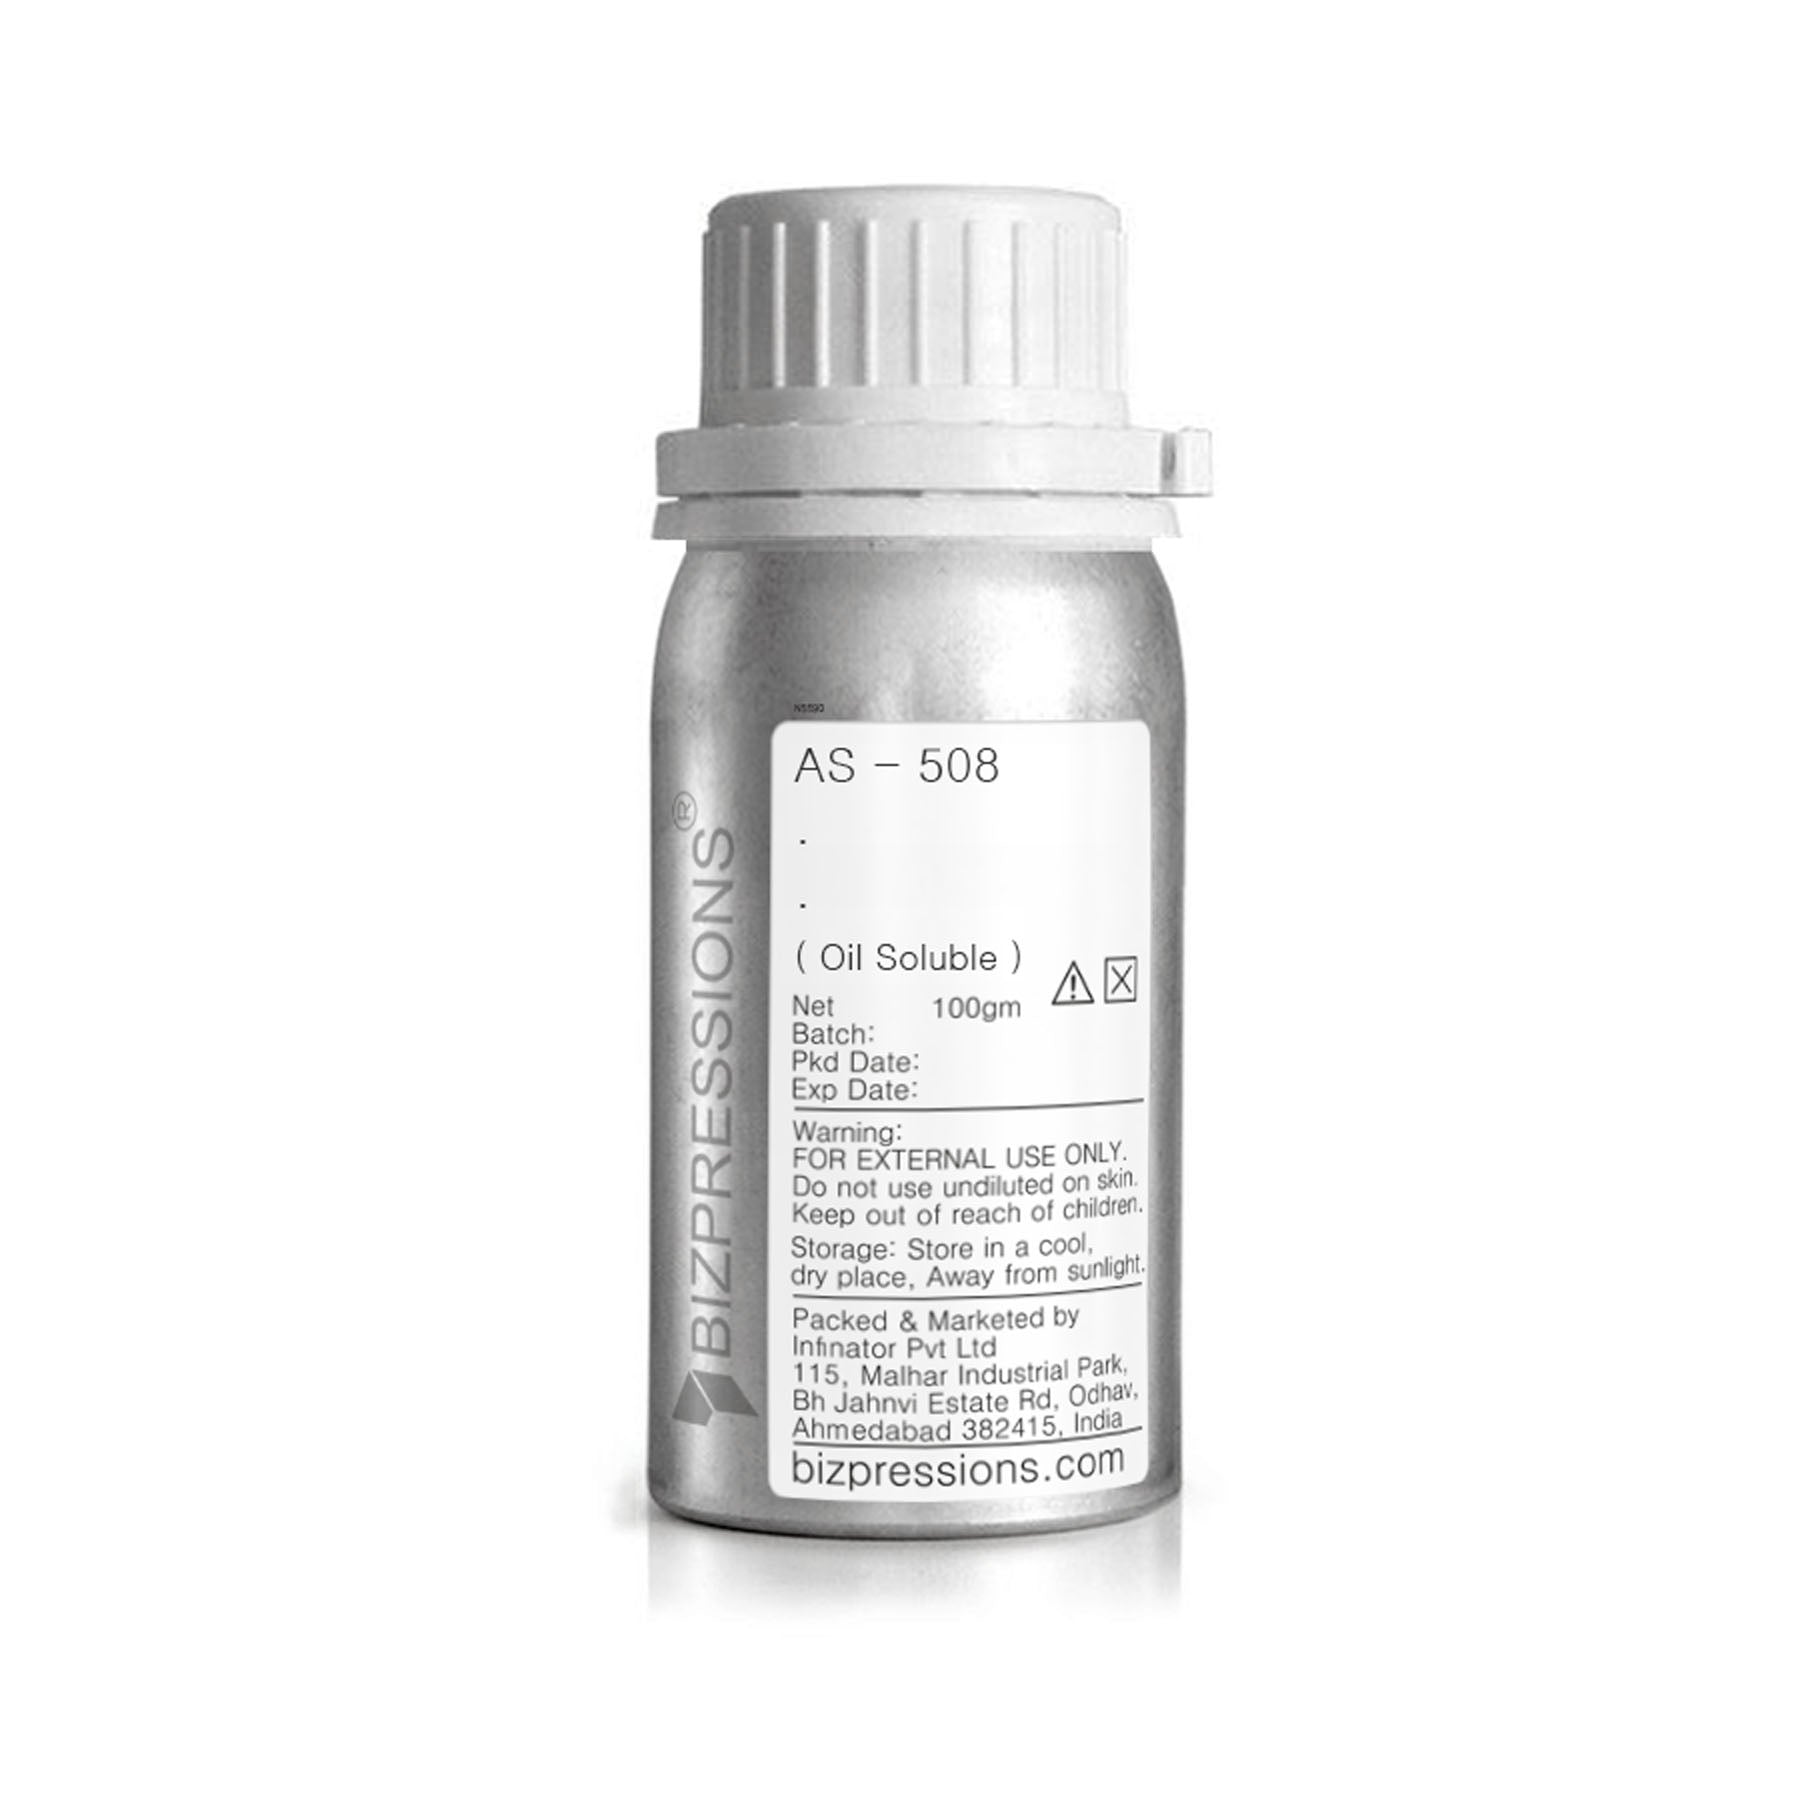 AS - 508 - Fragrance ( Oil Soluble ) - 100 gm